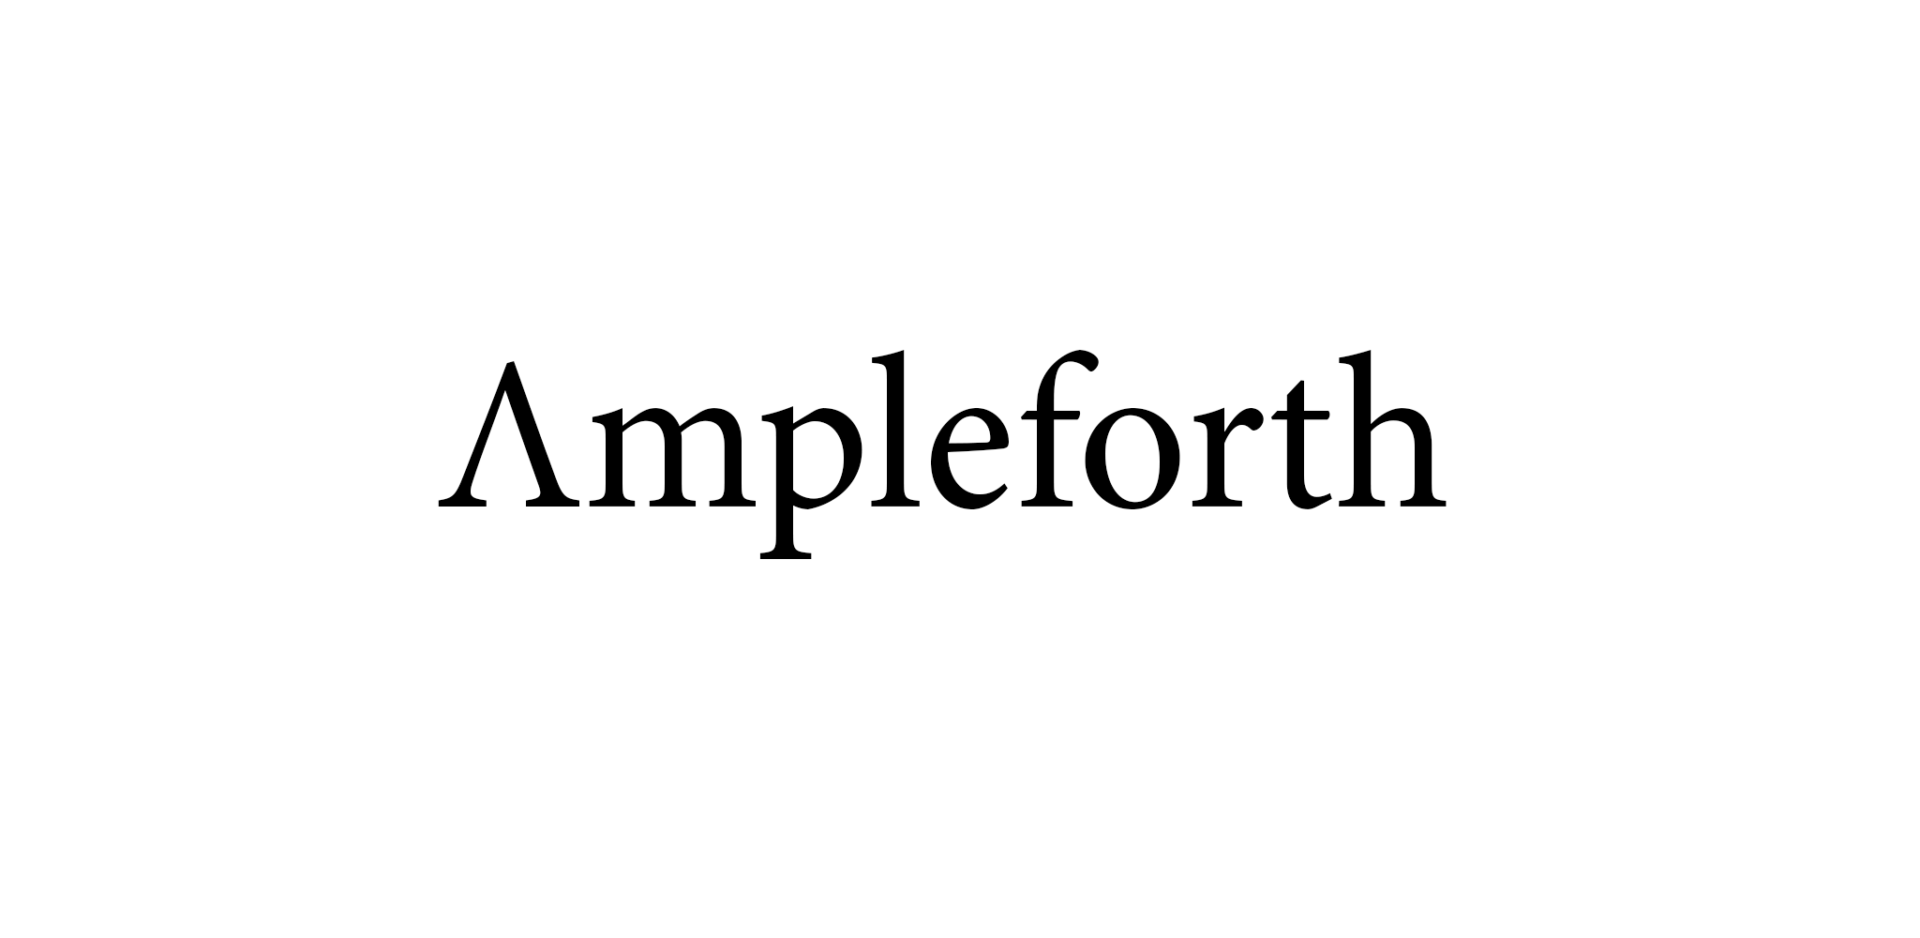 Ampleforth: A Digital Asset Aiming To Differentiate Itself From Bitcoin 11